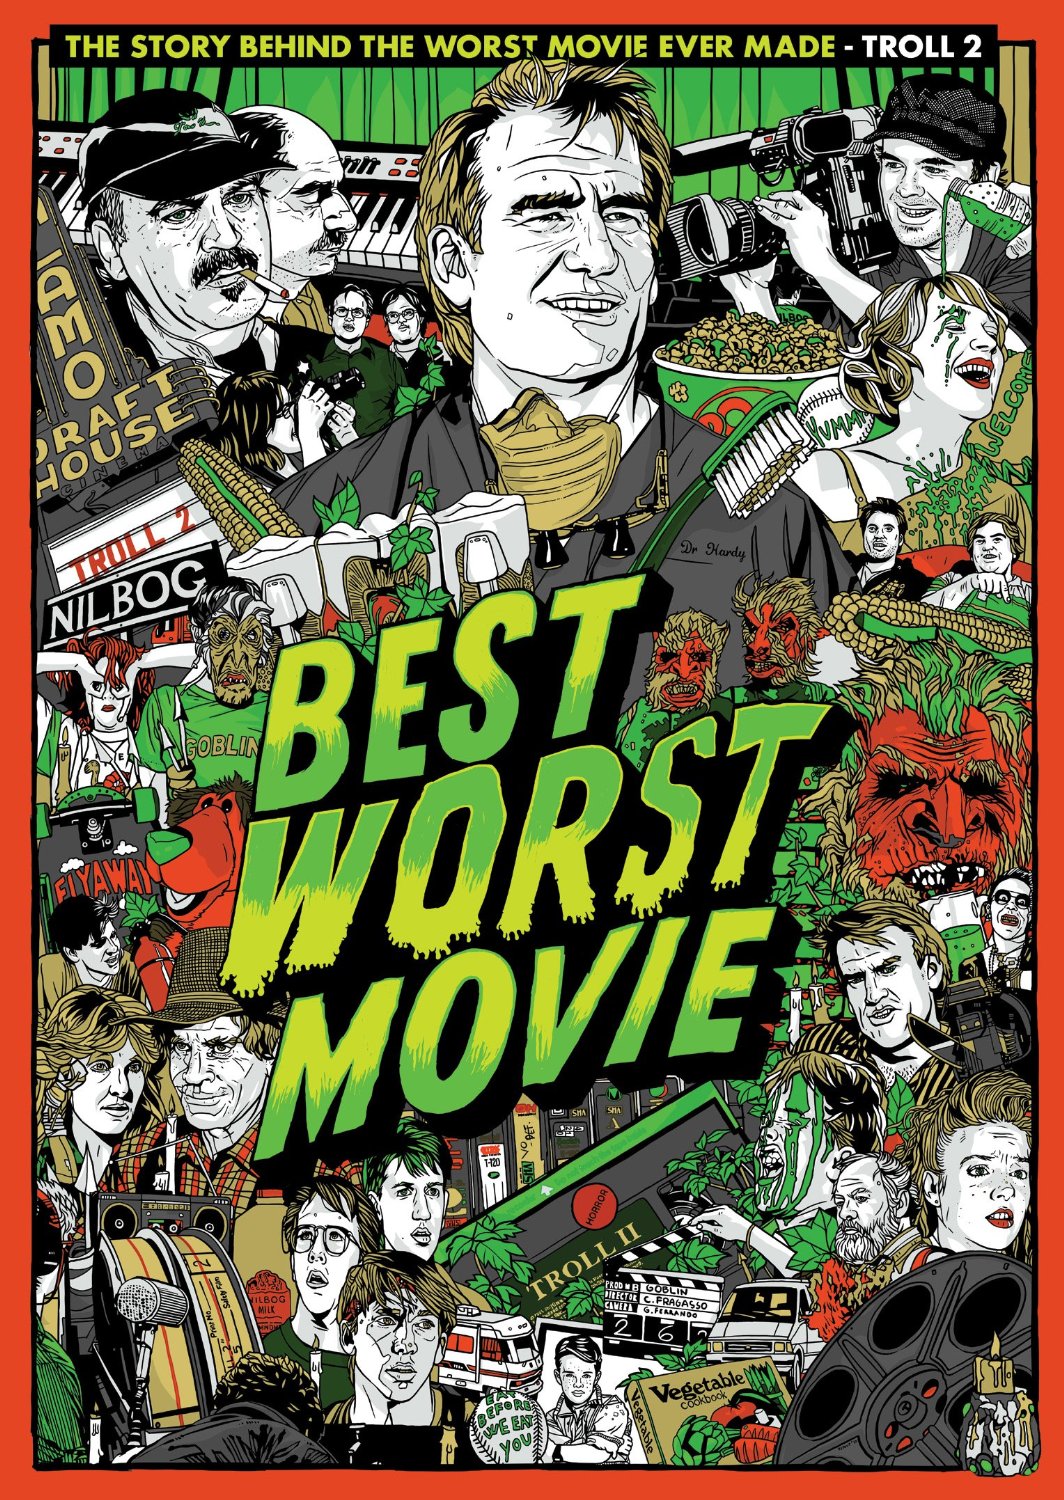 Image result for troll 2 best worst movie